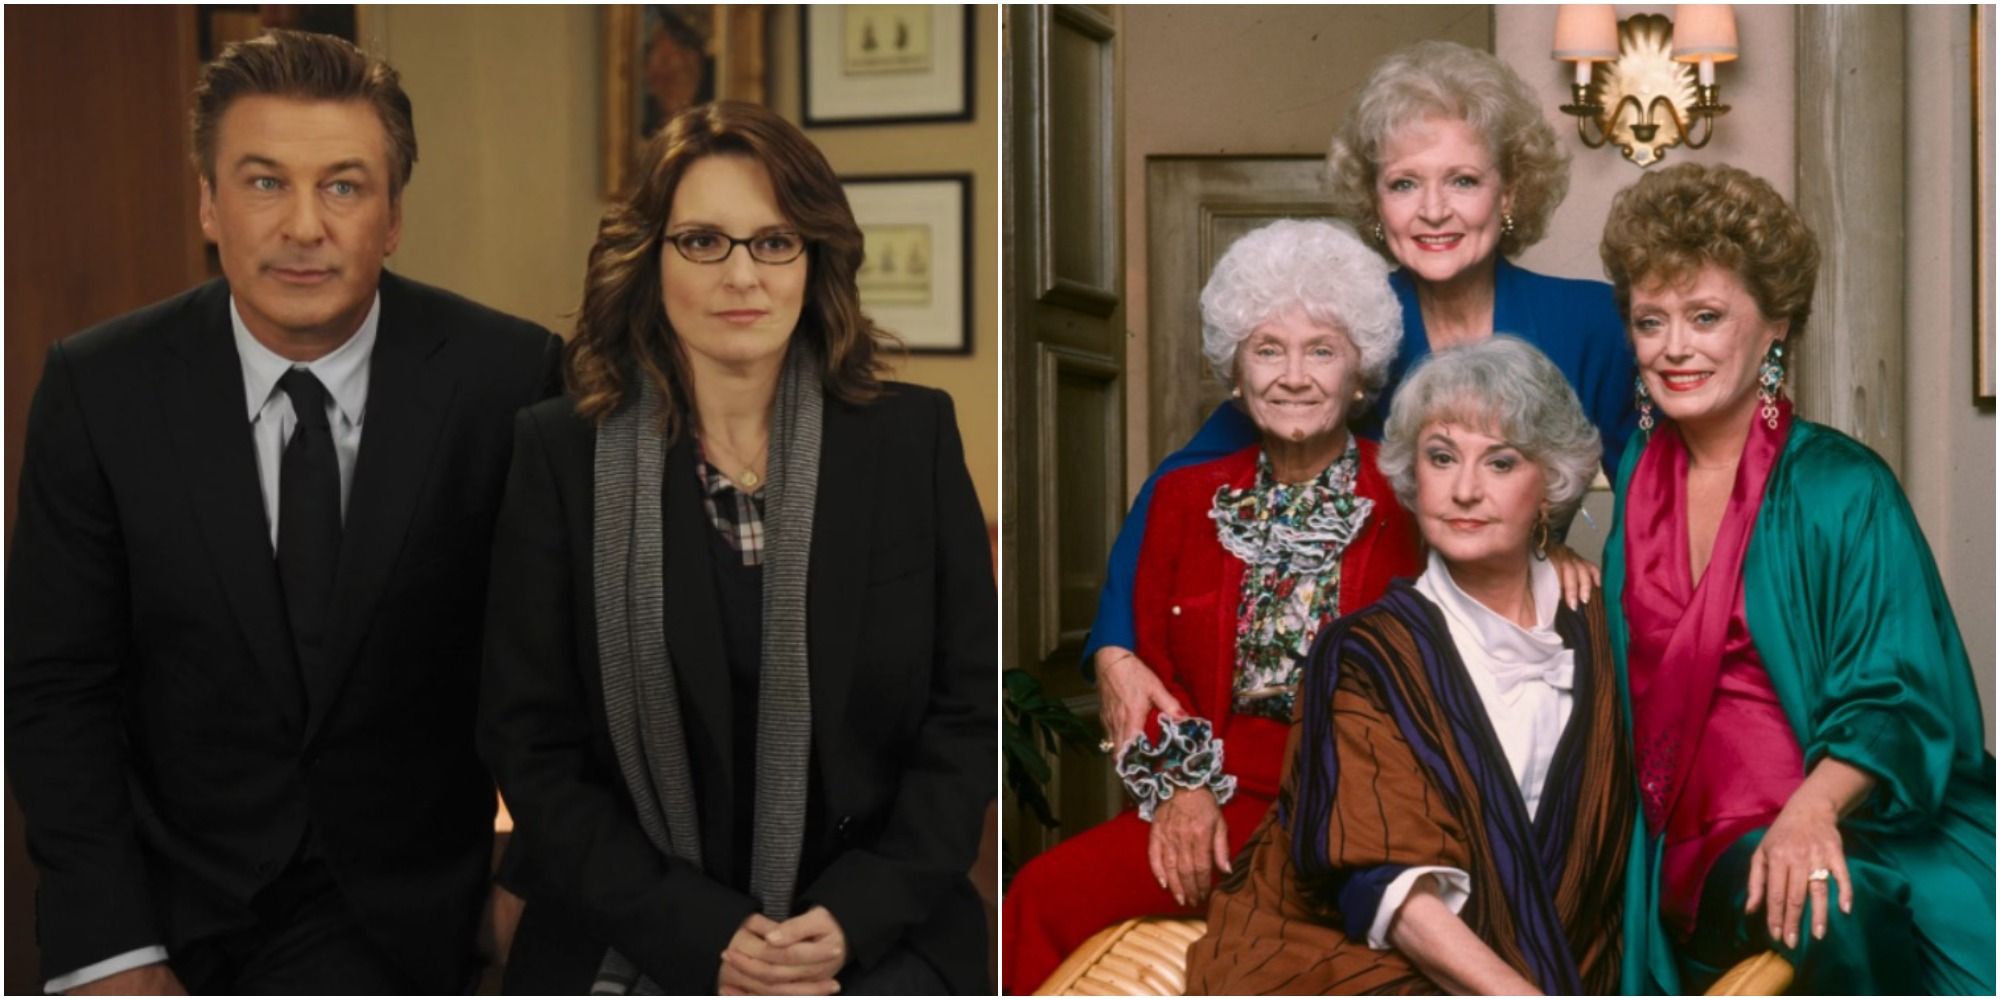 30 Rock and The Golden Girls